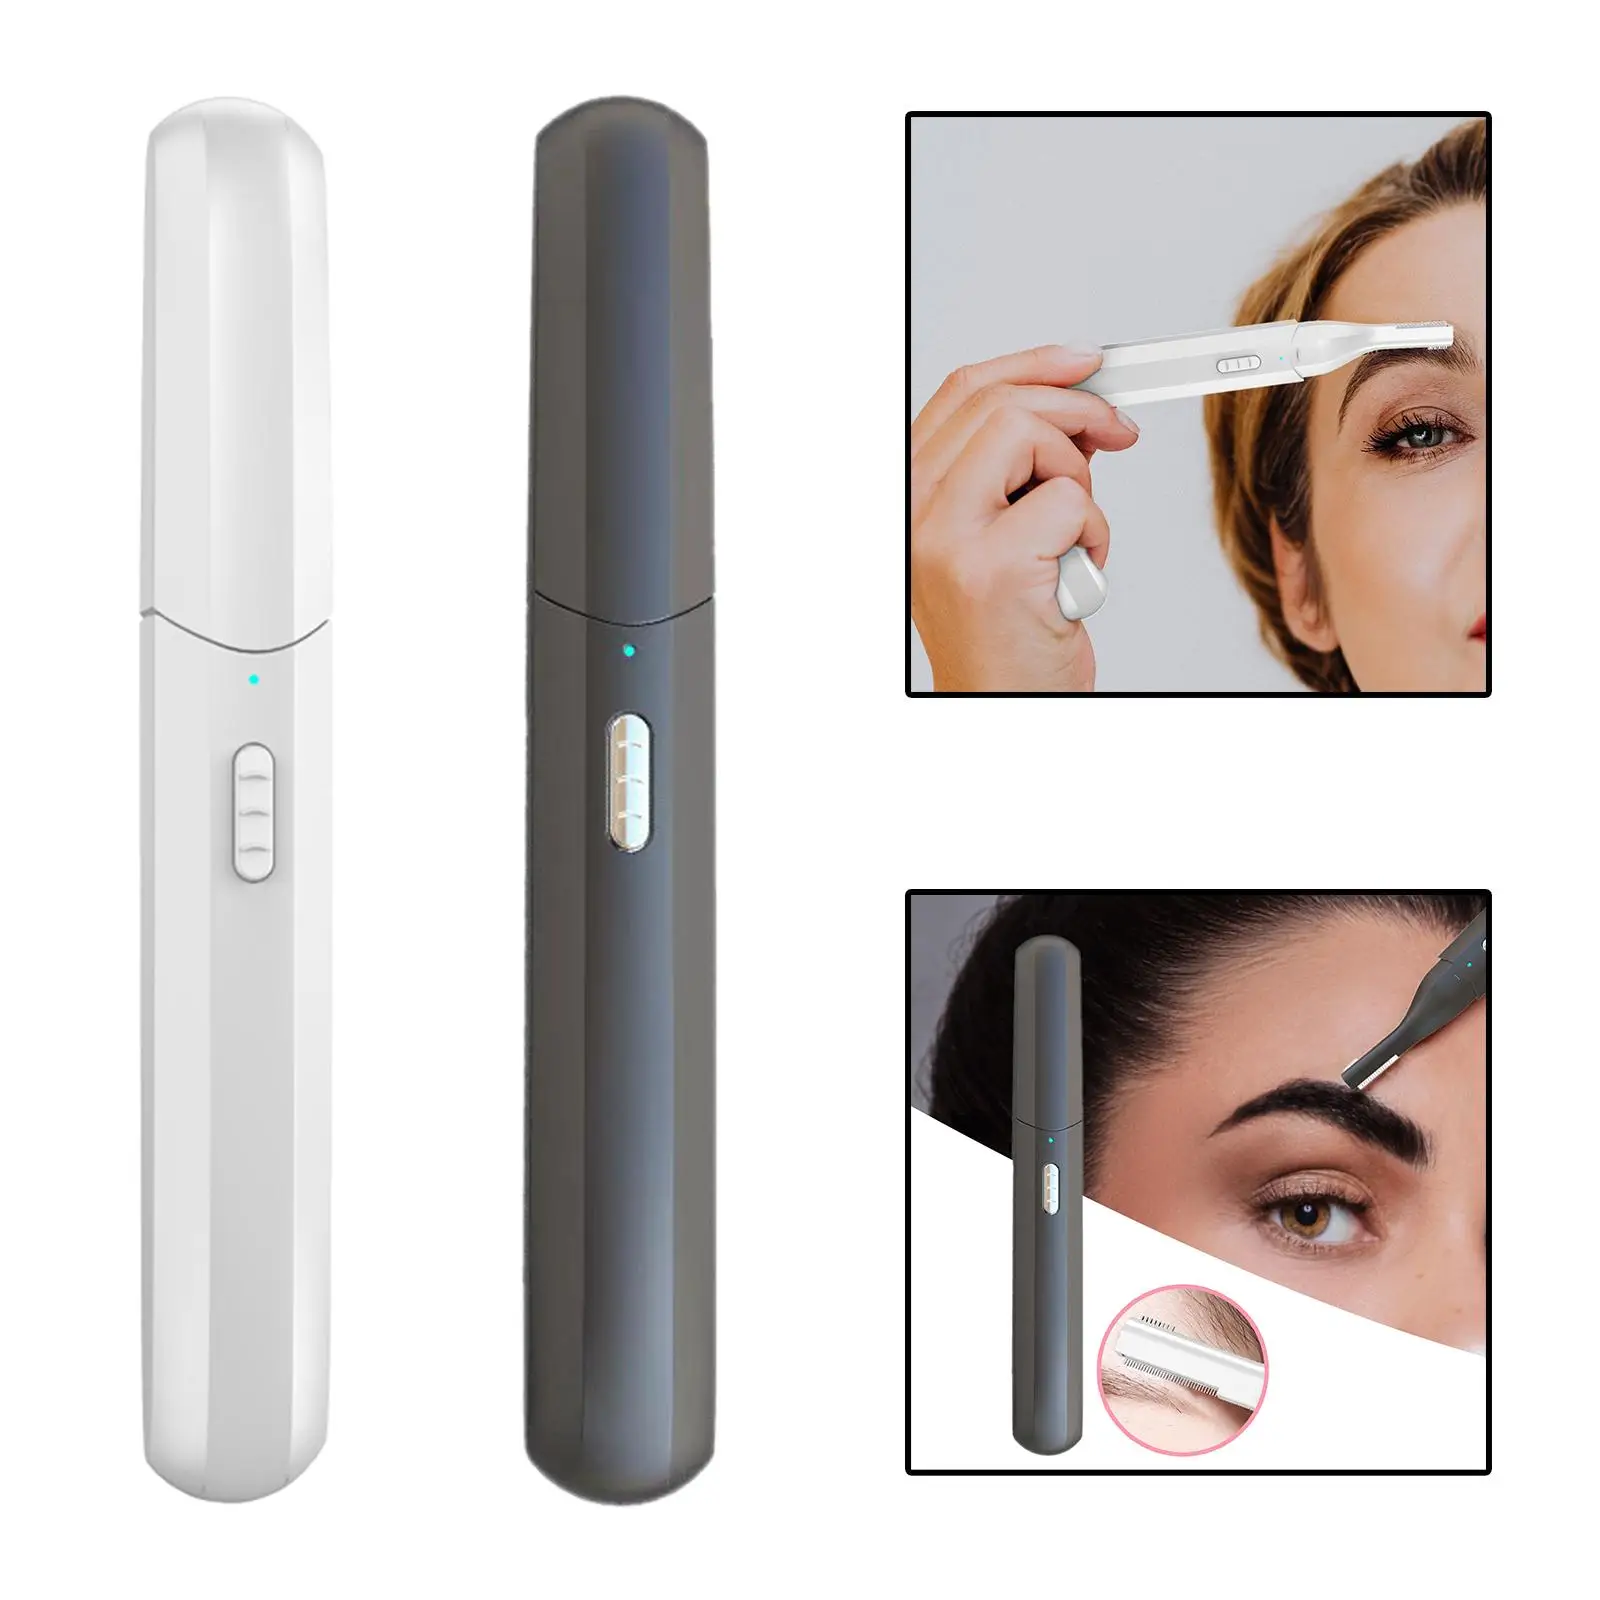 Portable Hair Removal Tool with Dual Cutter Head Precision Cutting for Lips